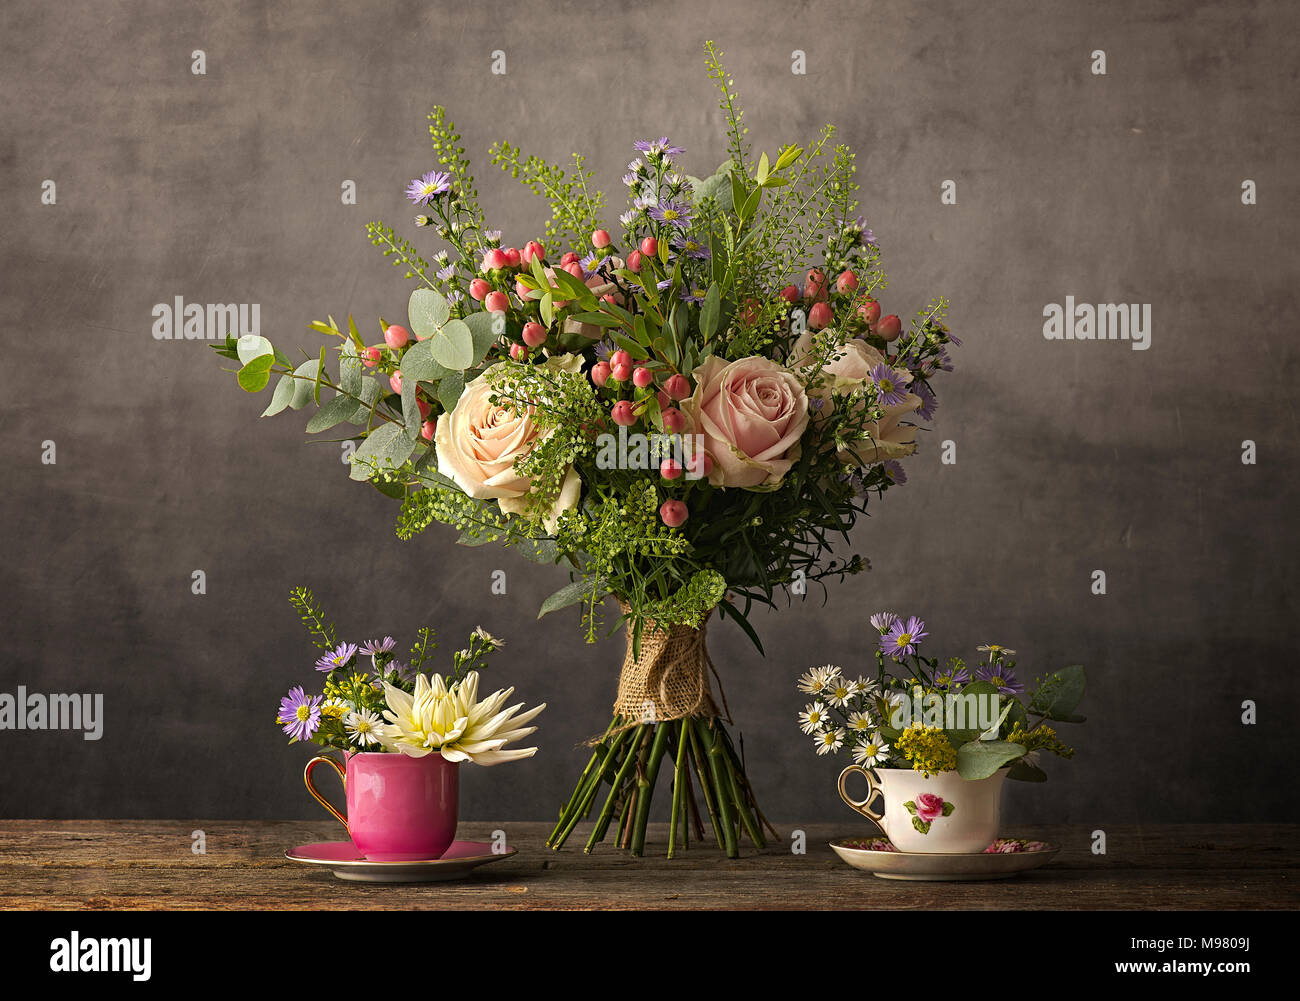 Bouquet of roses and flowers in tea cup Stock Photo